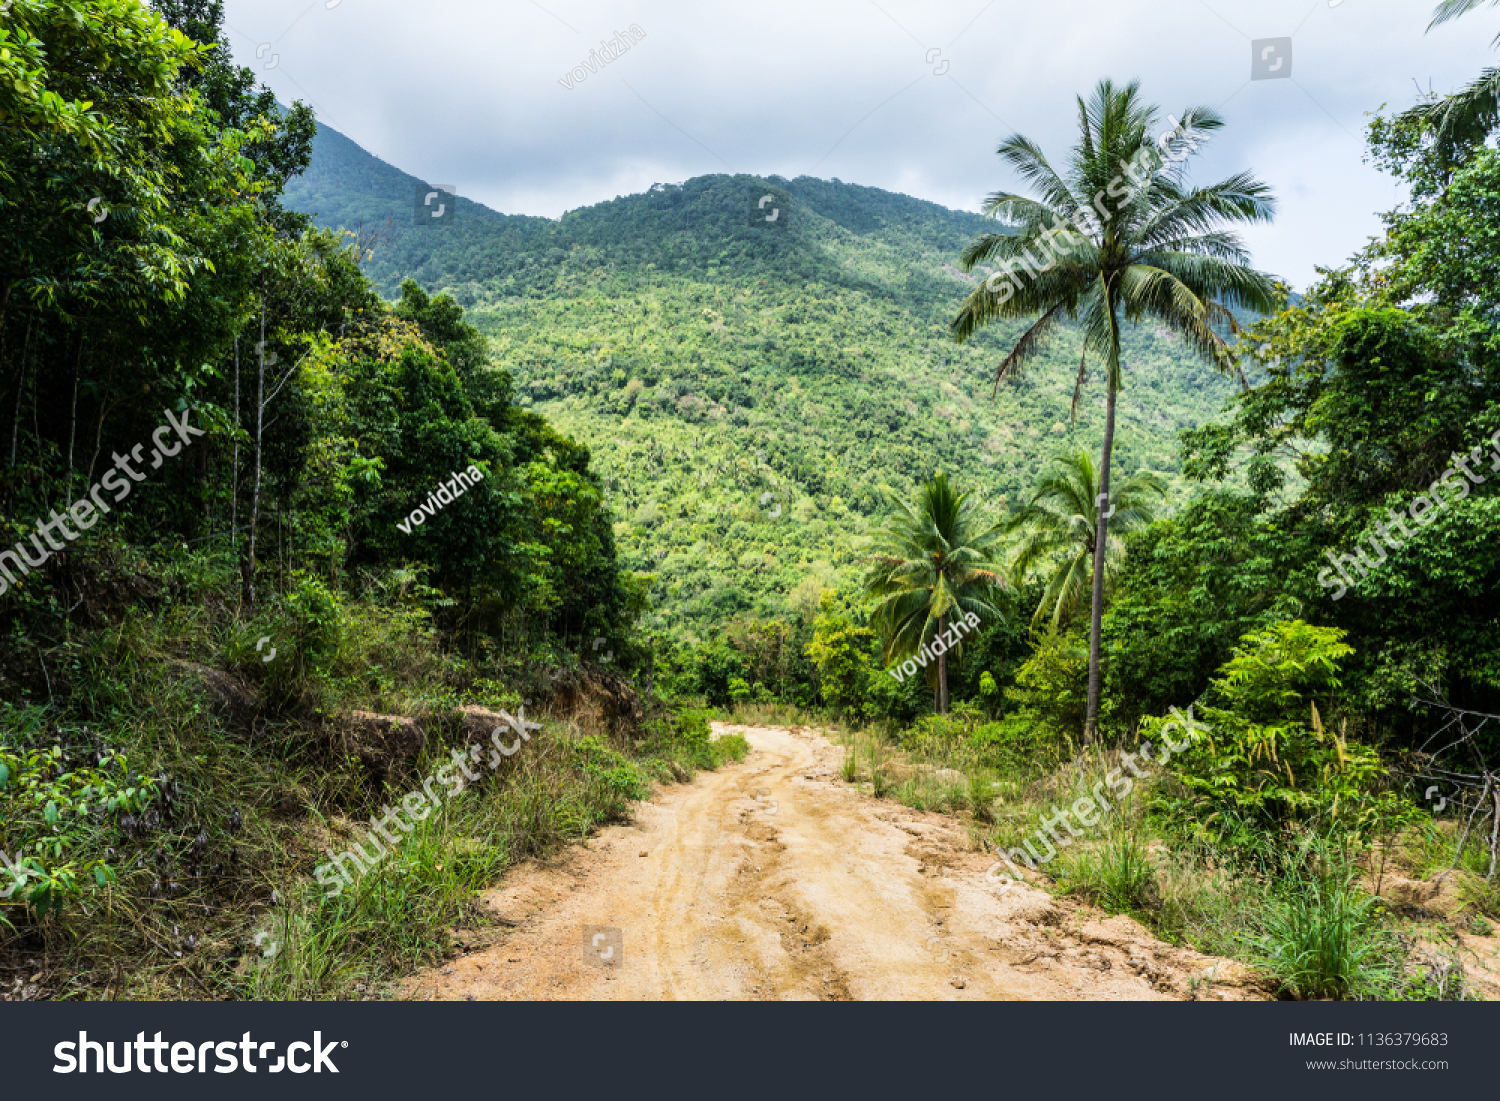 A dirt road down among the jungle and palm trees on a tropical island in clear weather #1136379683